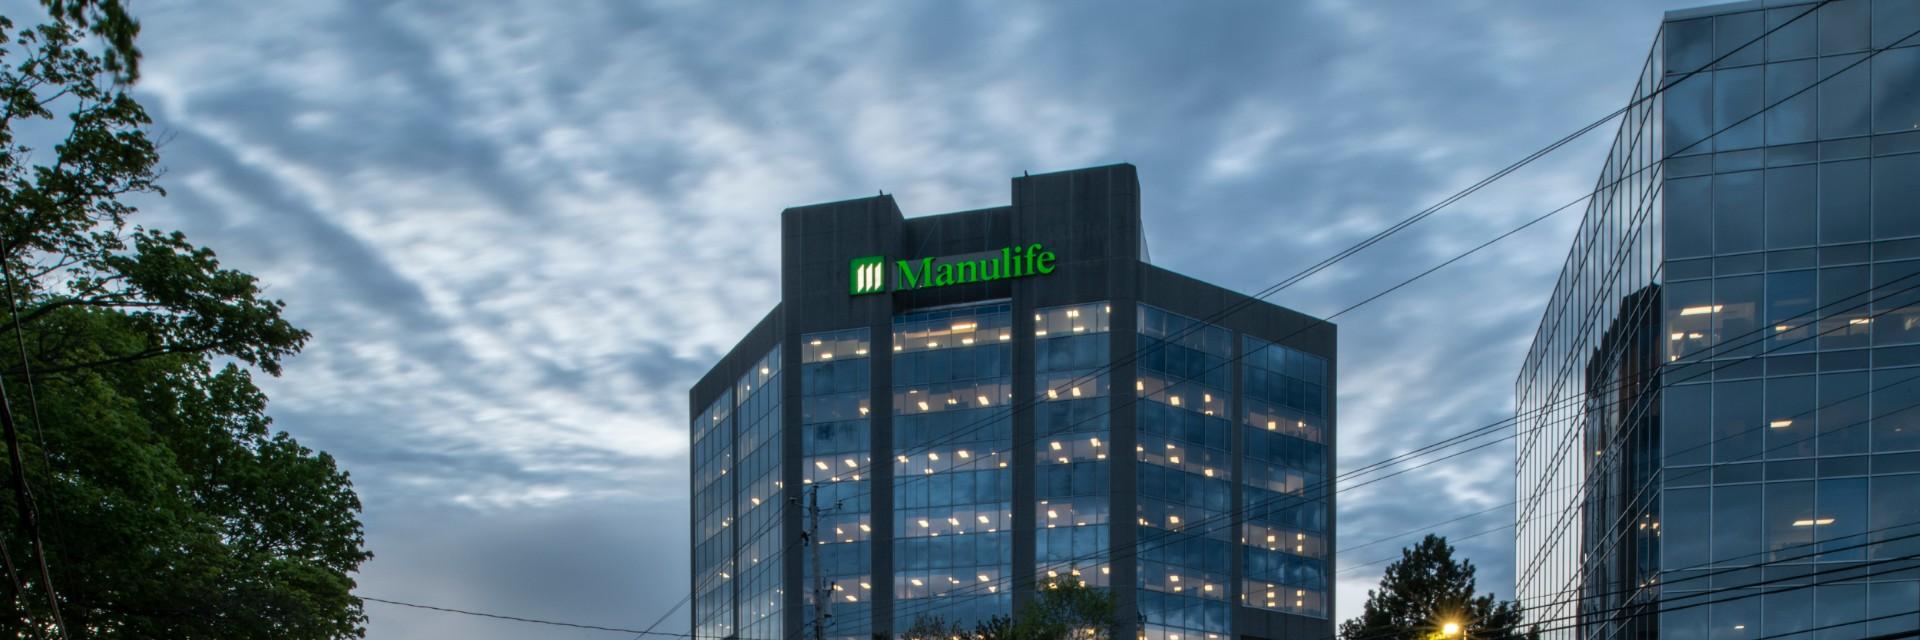 Manulife Financial: Championing inclusion, attracting talent ...